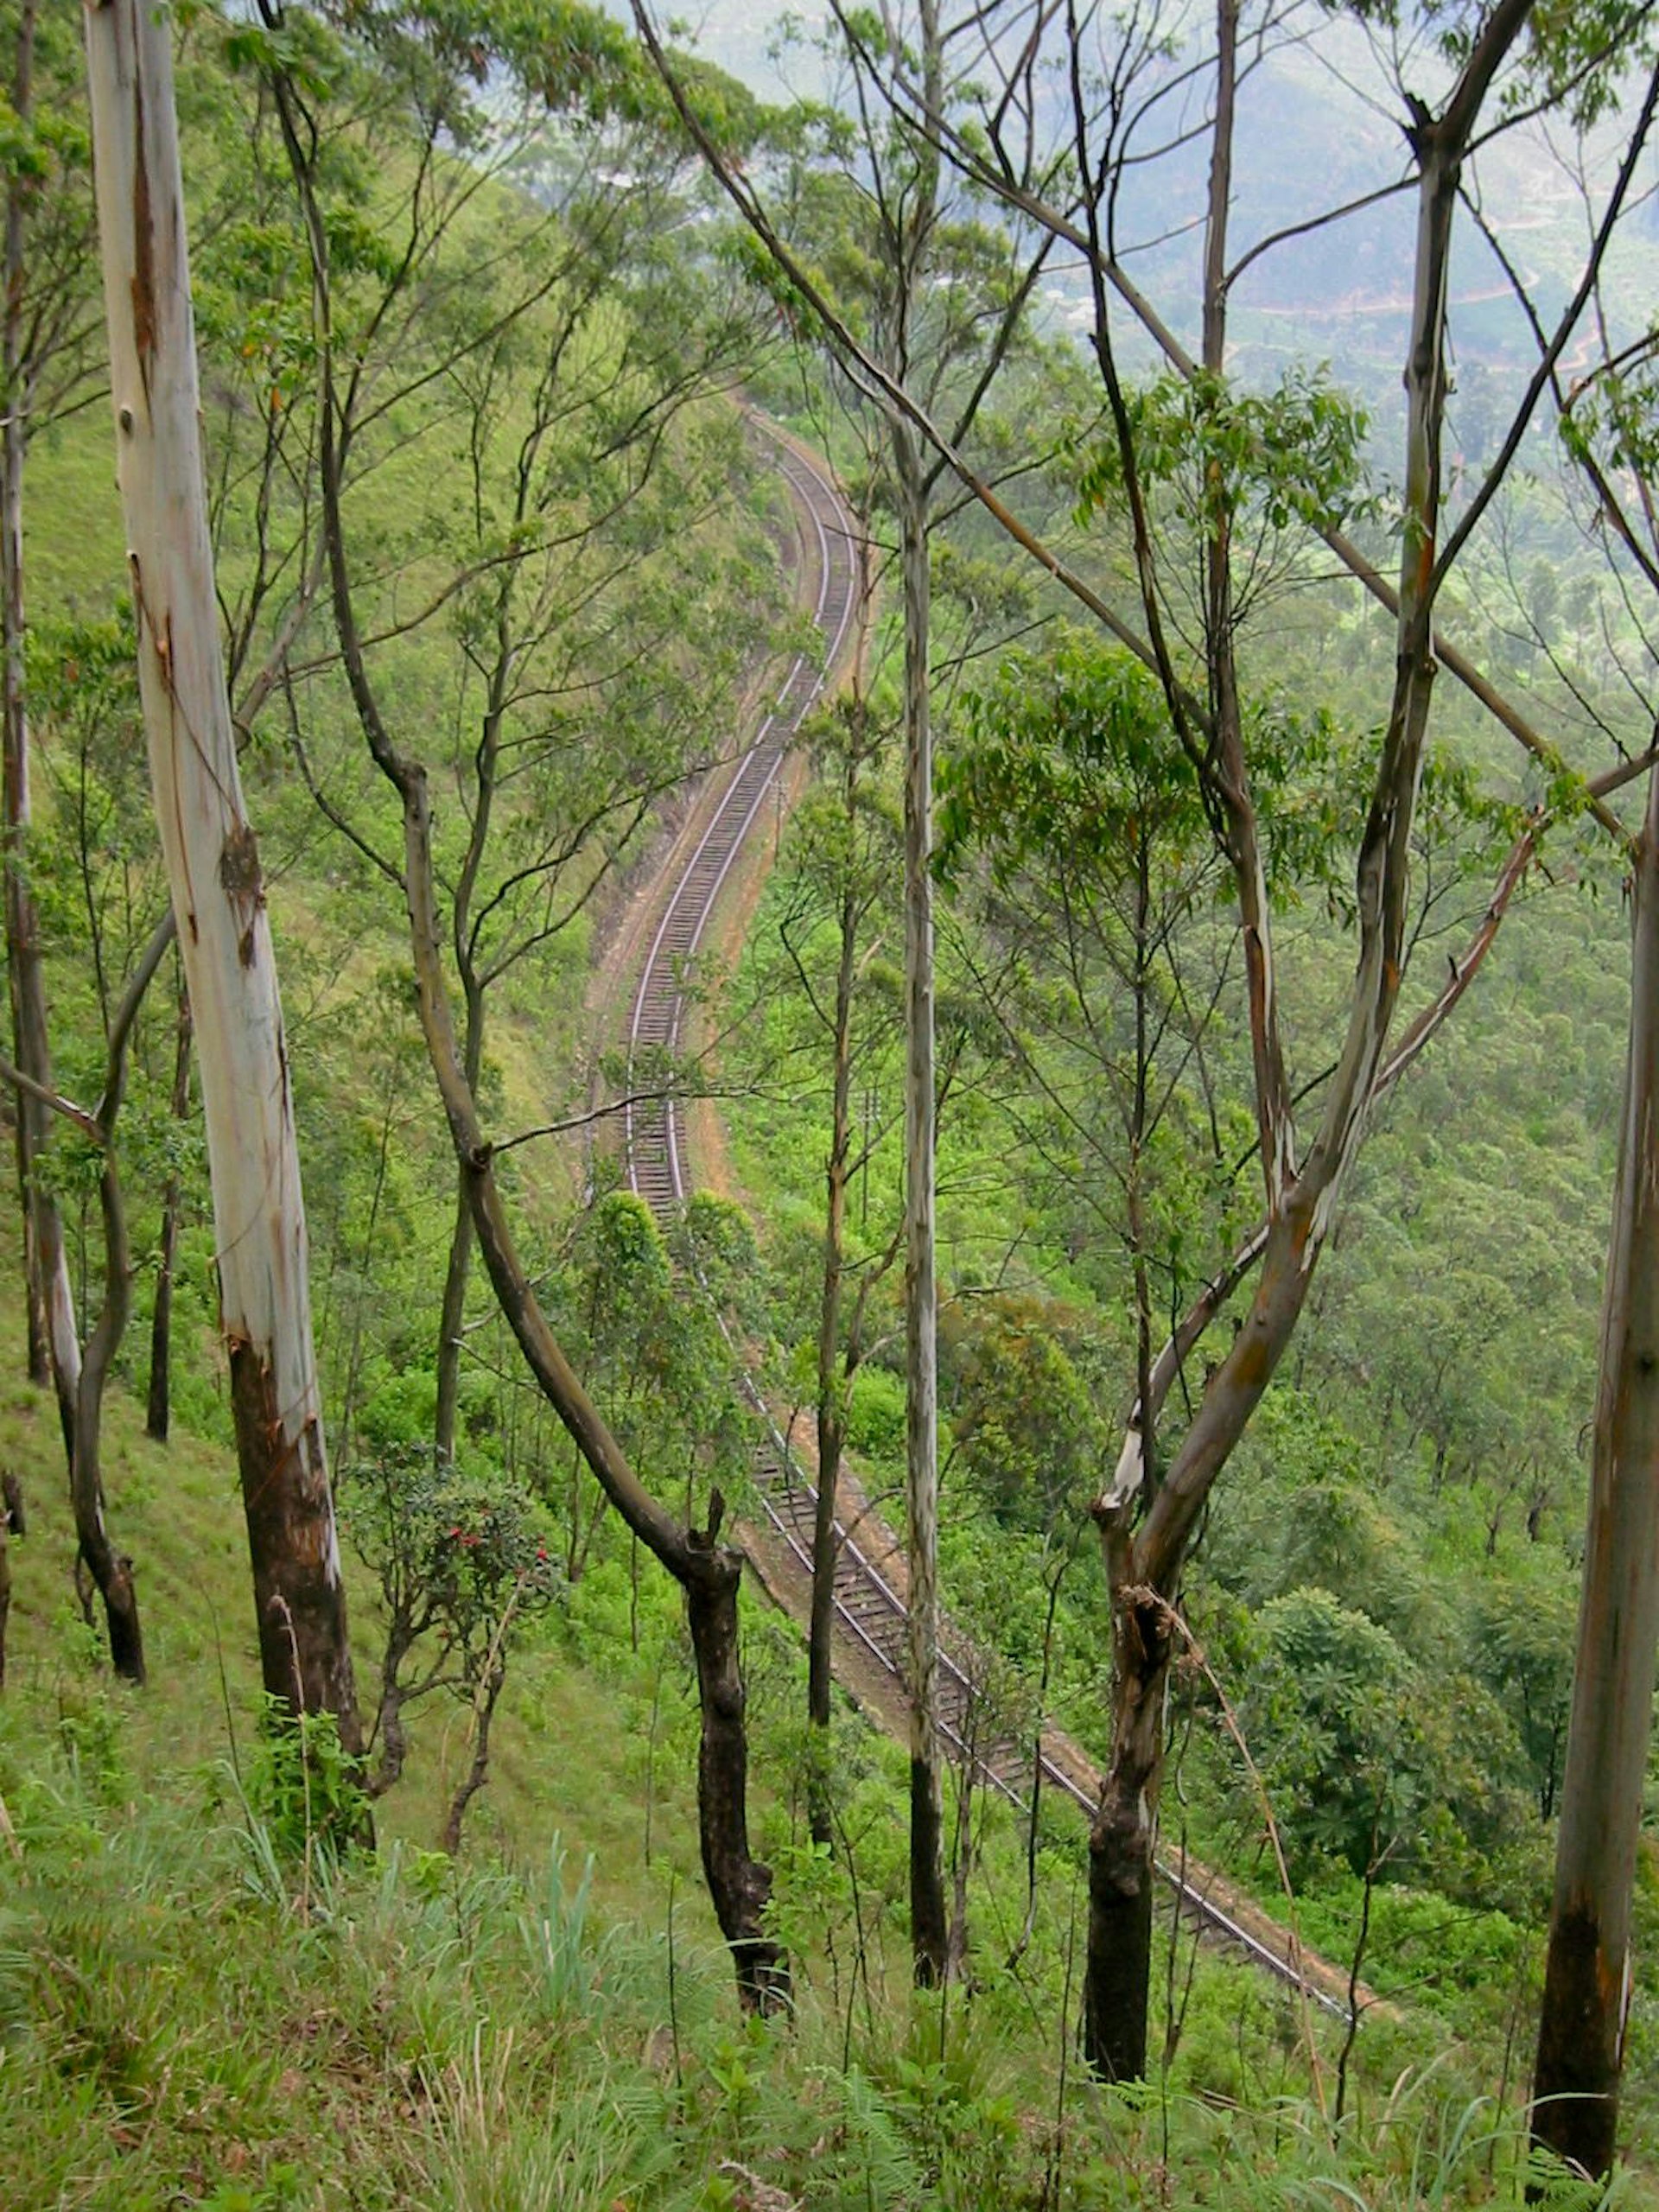 Railtracks through the trees in the Tangamale Sanctuary © Ethan Gelber / Lonely Planet